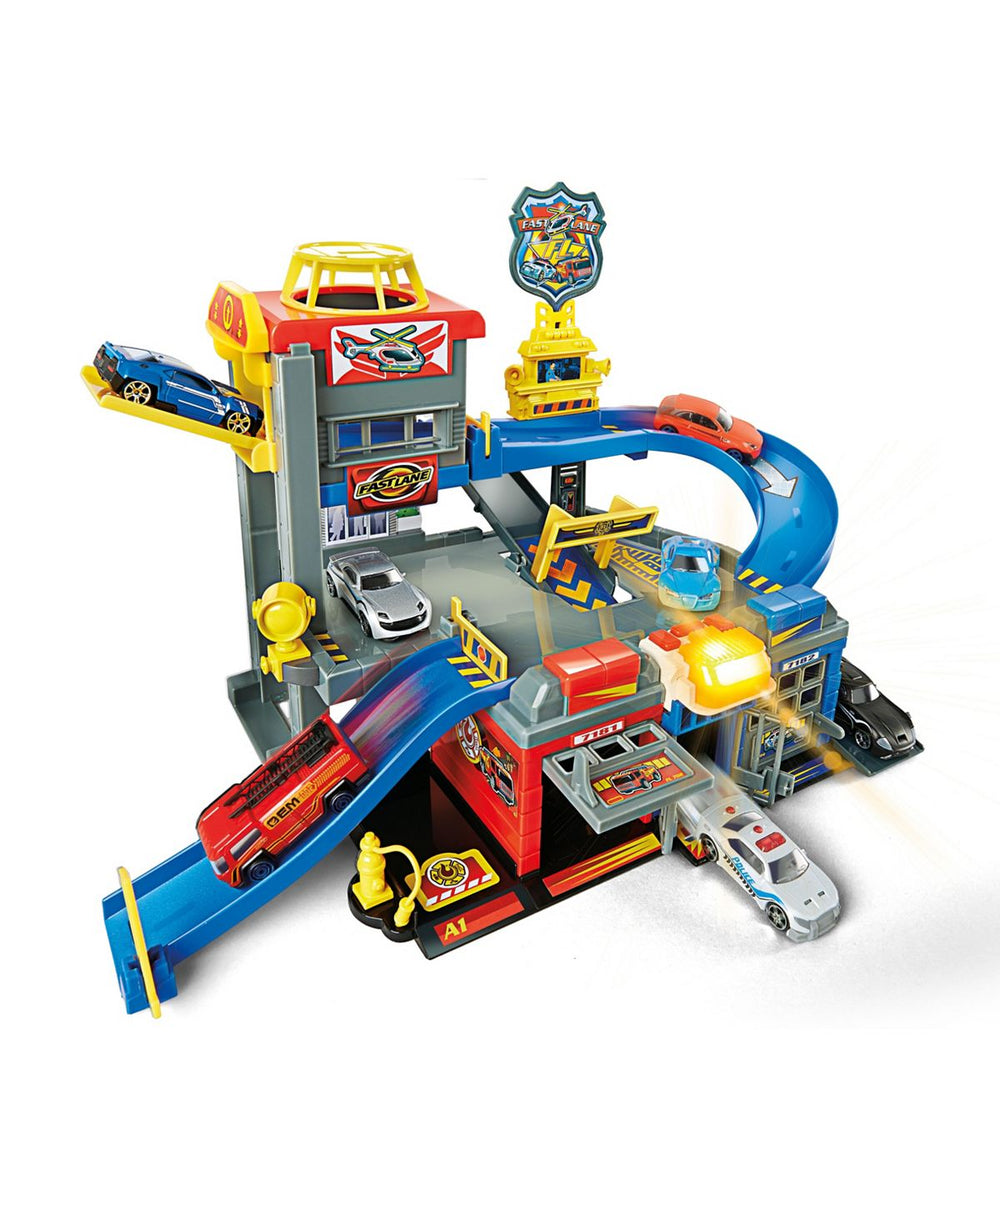 Toys R Us Fast Lane Rescue Station Playset with Interactive Features